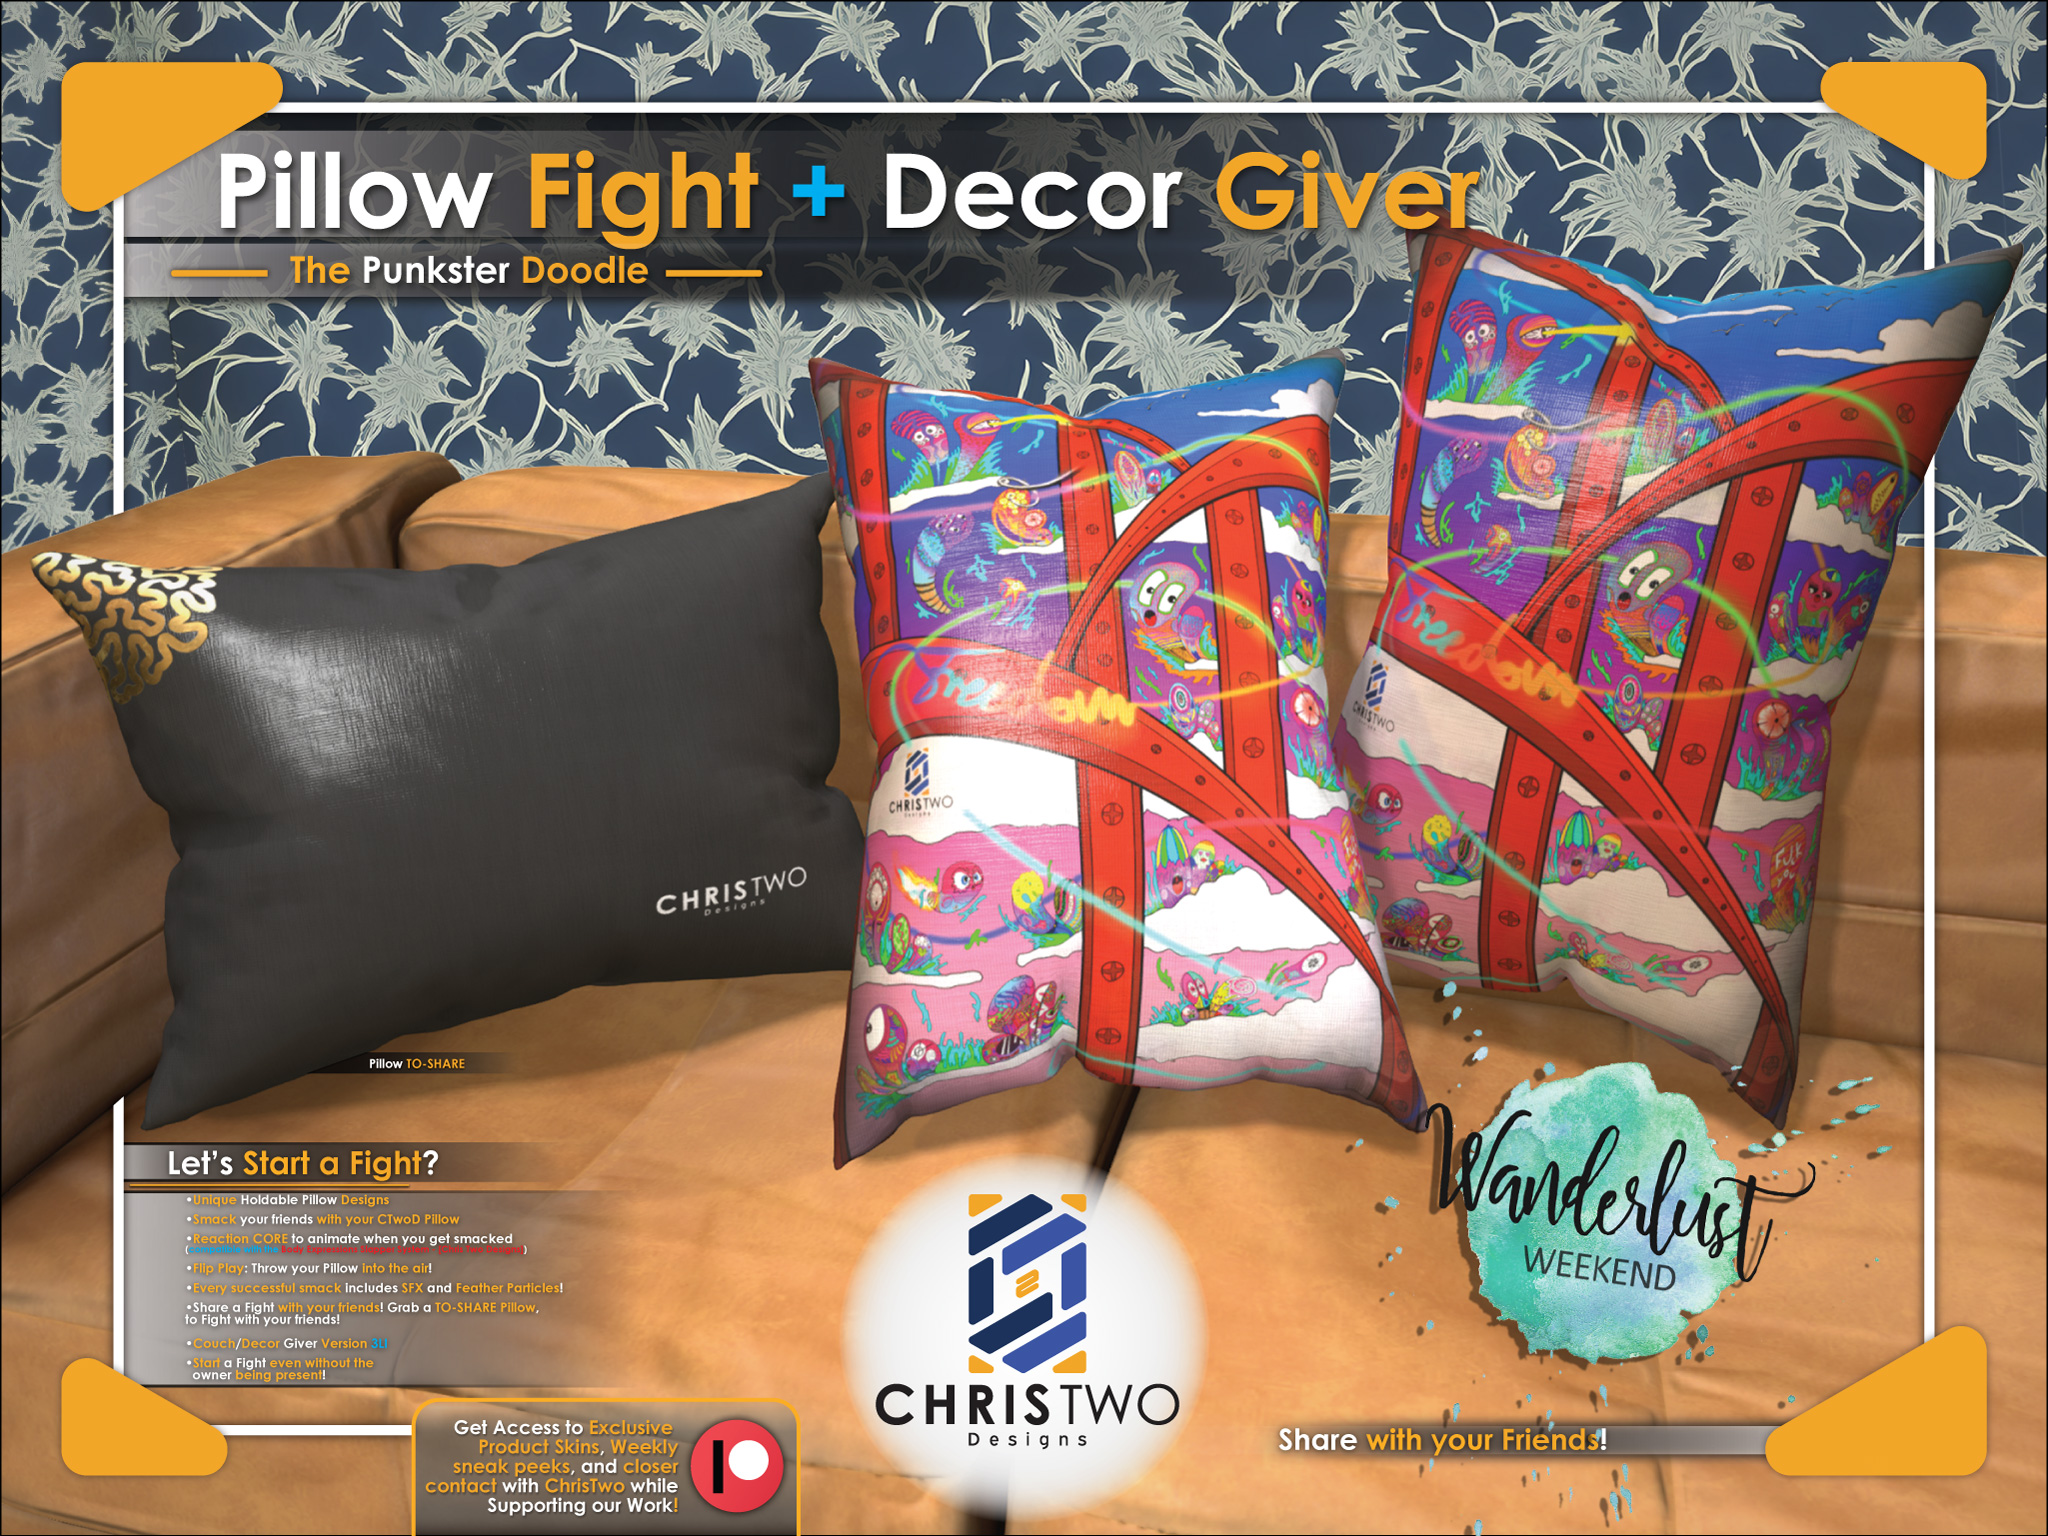 Chris Two Designs – Pillow Fight